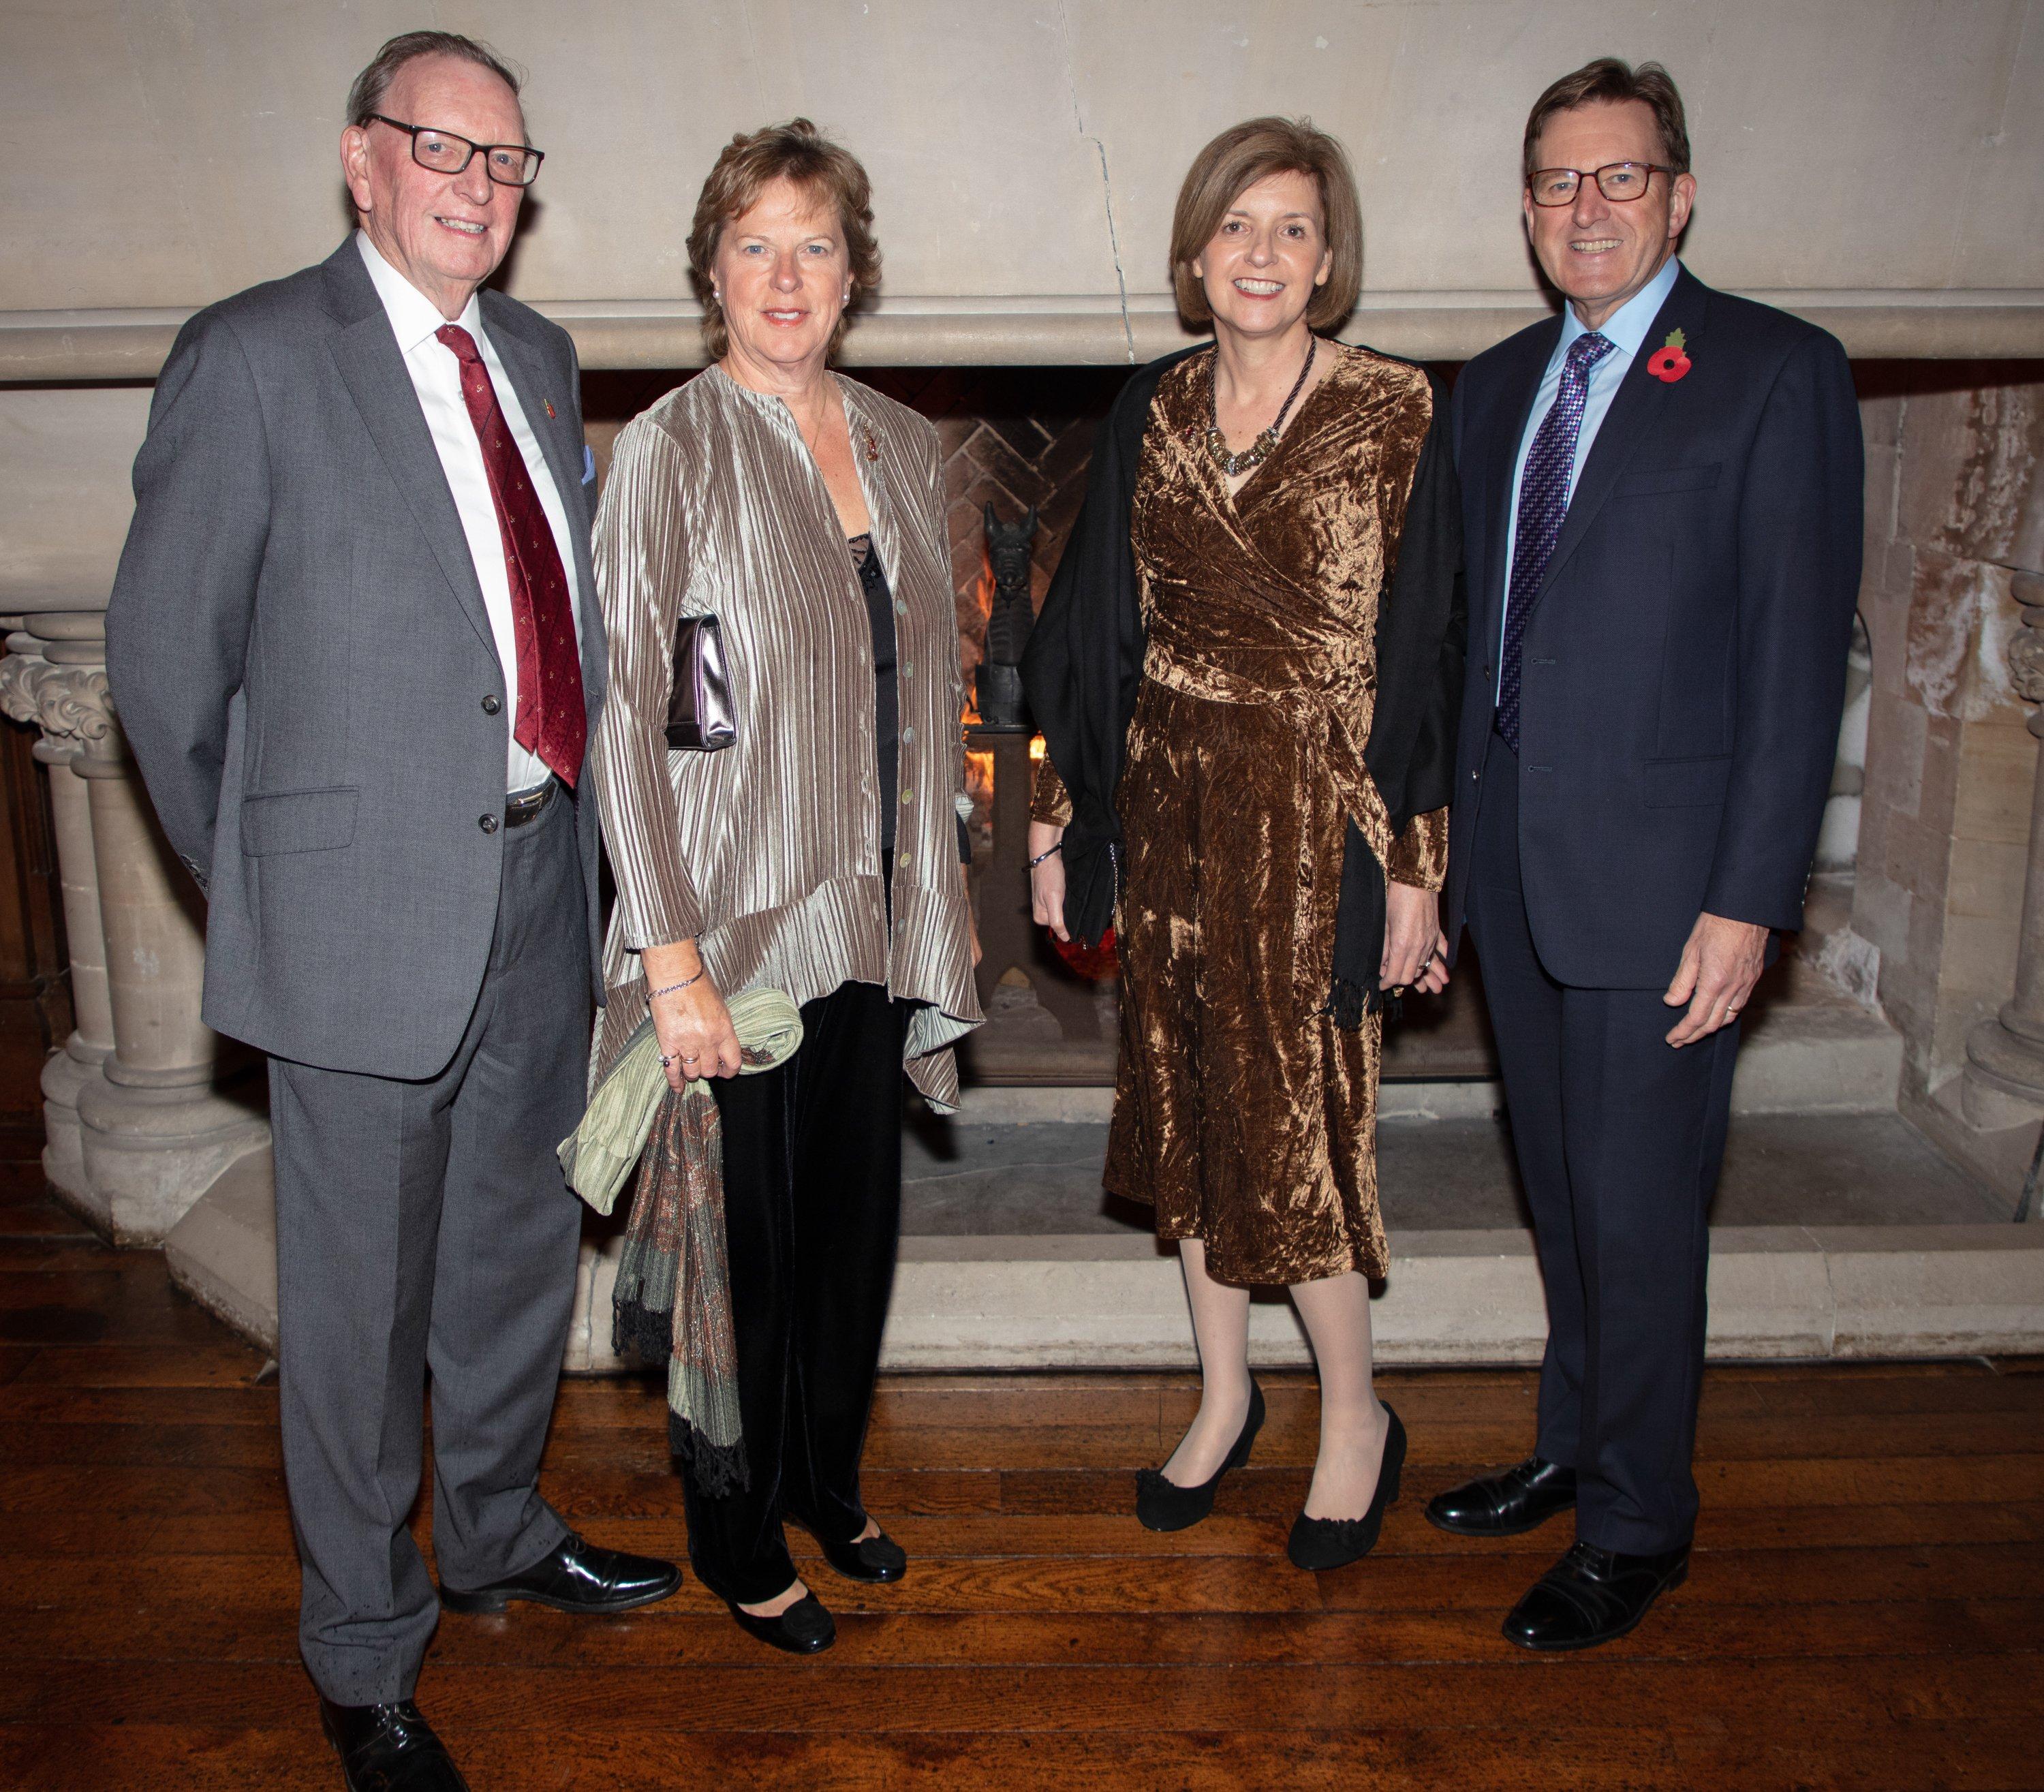 Caroline Nicholls, former High Sheriff of West Sussex, and her husband David with Sara and Bernard Uzzell. Picture: Graham Franks Photography